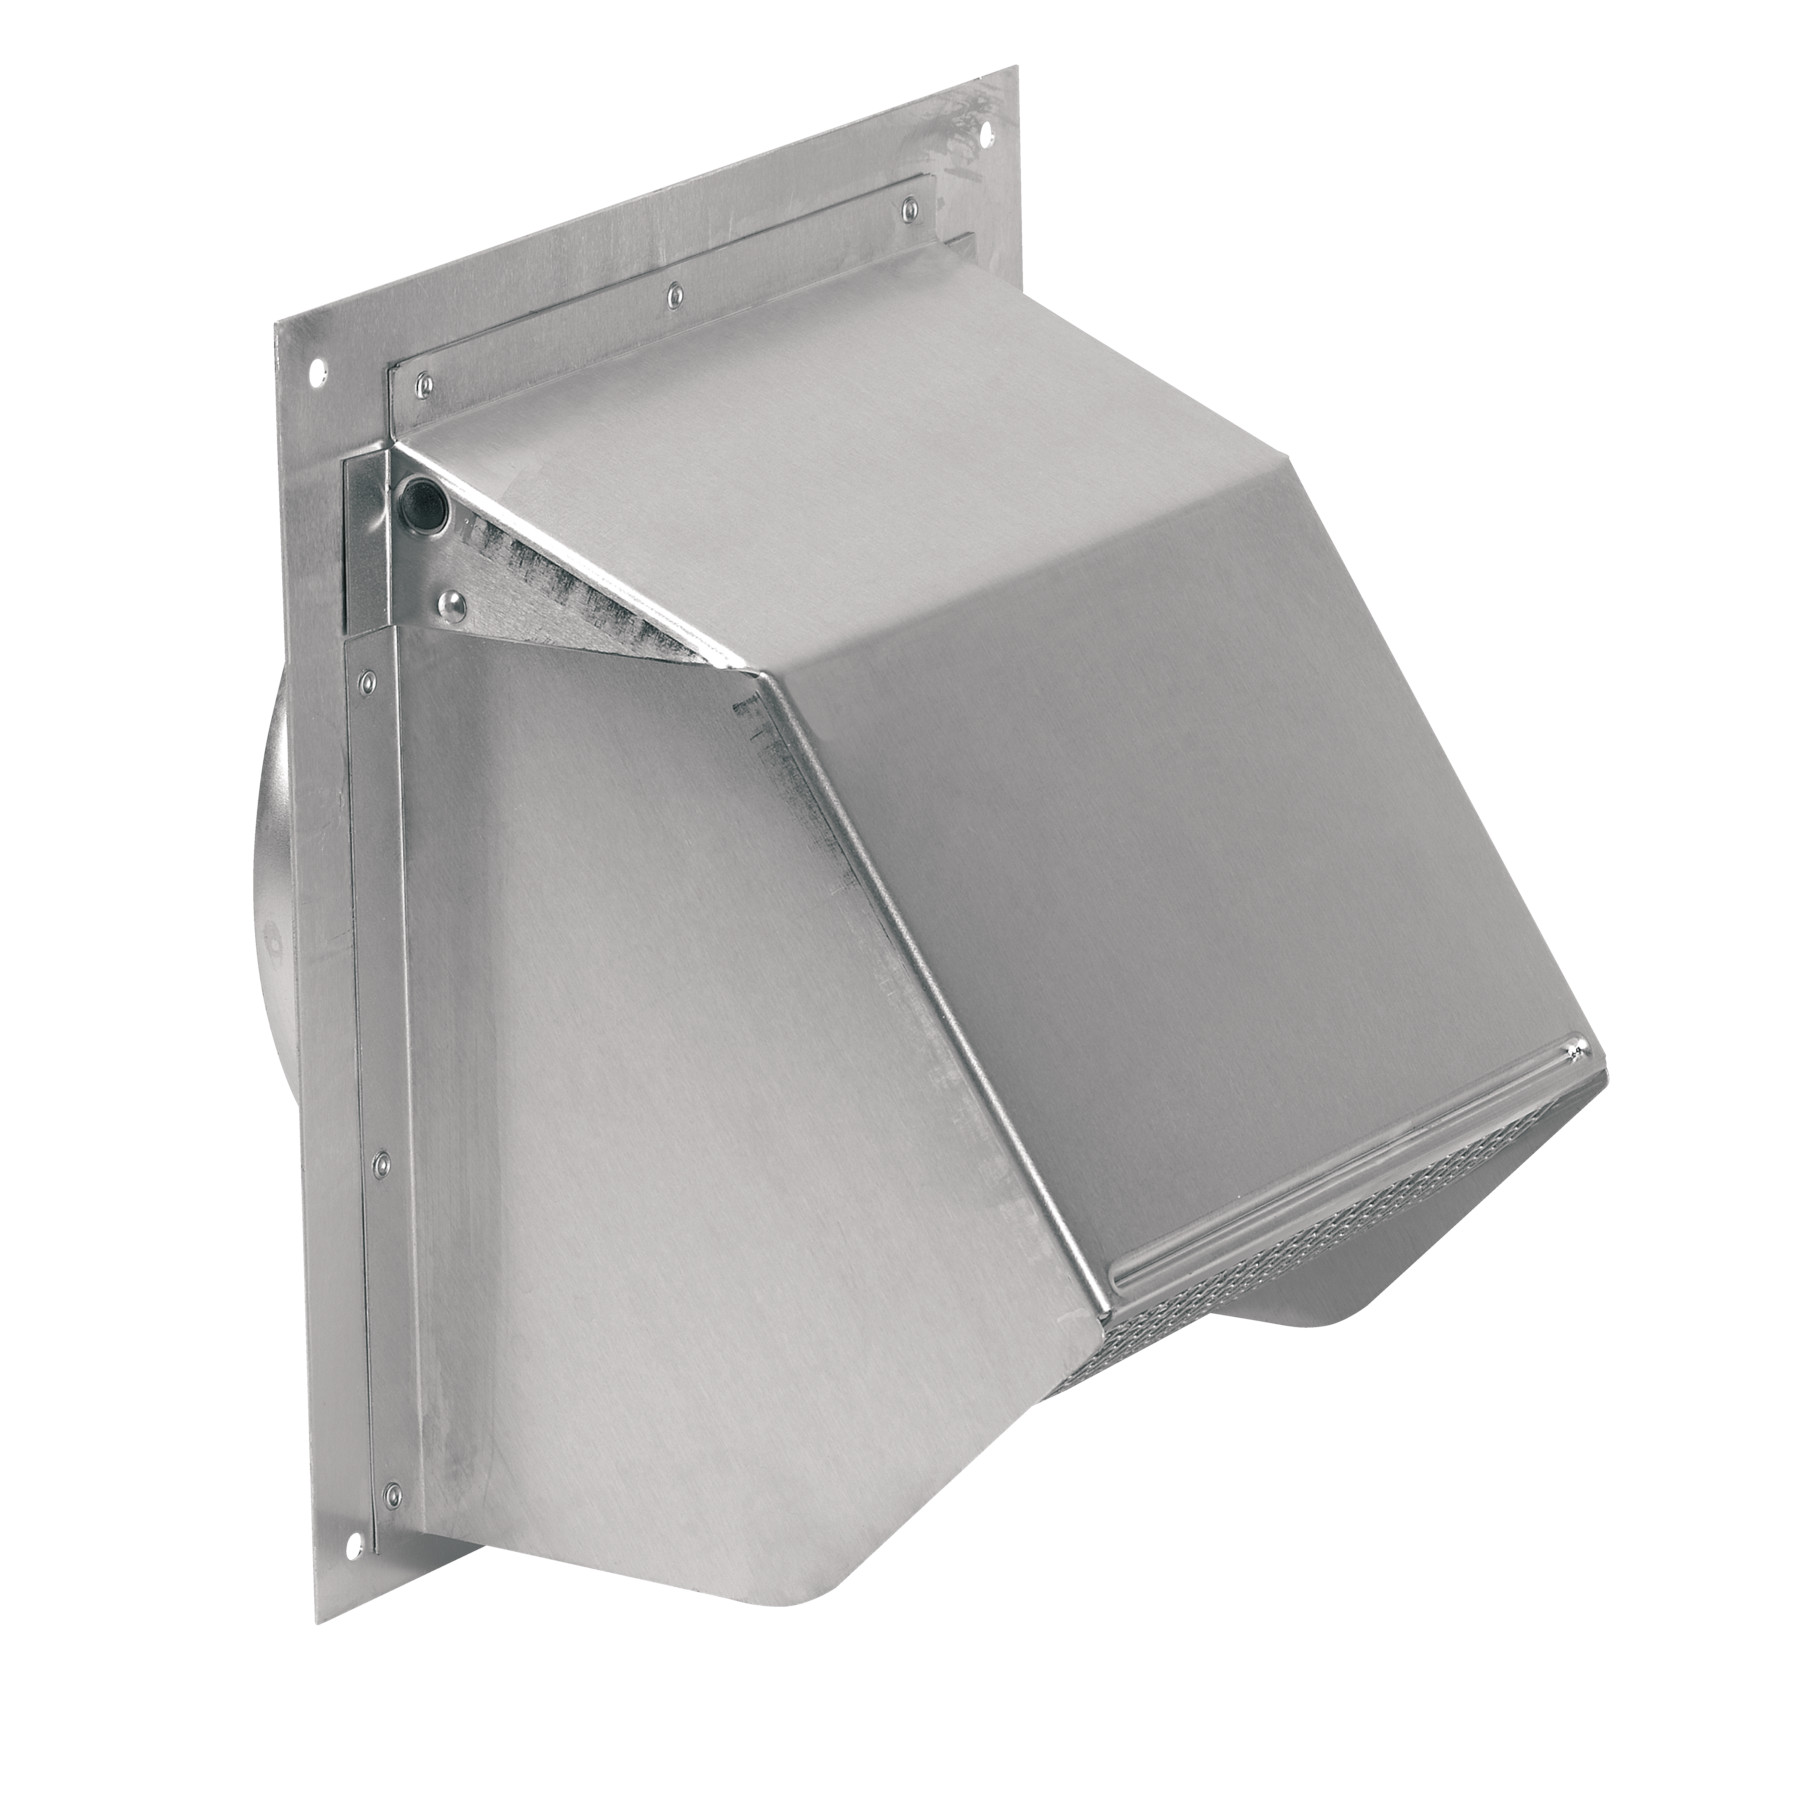 Wall Cap for 7-Inch Round Duct for Range Hoods and Bath Ventilation Fans